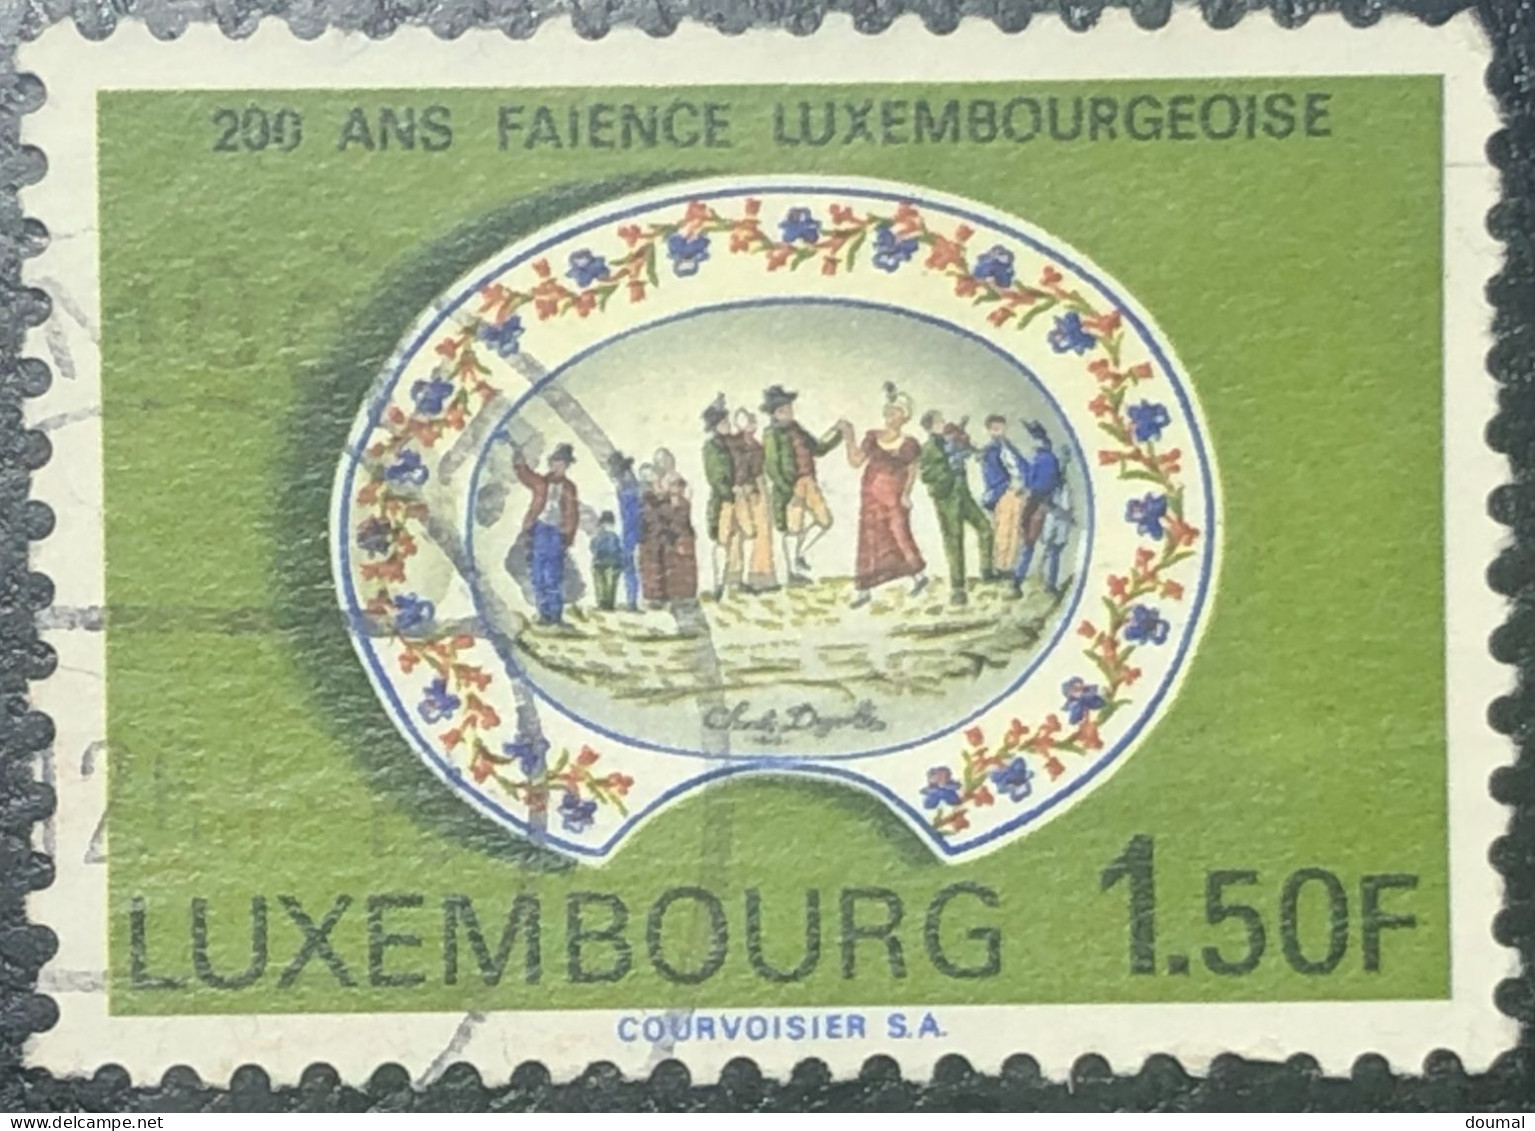 Luxembourg 1967, 200 Years Of Luxembourg Faience And Others - Used Stamps